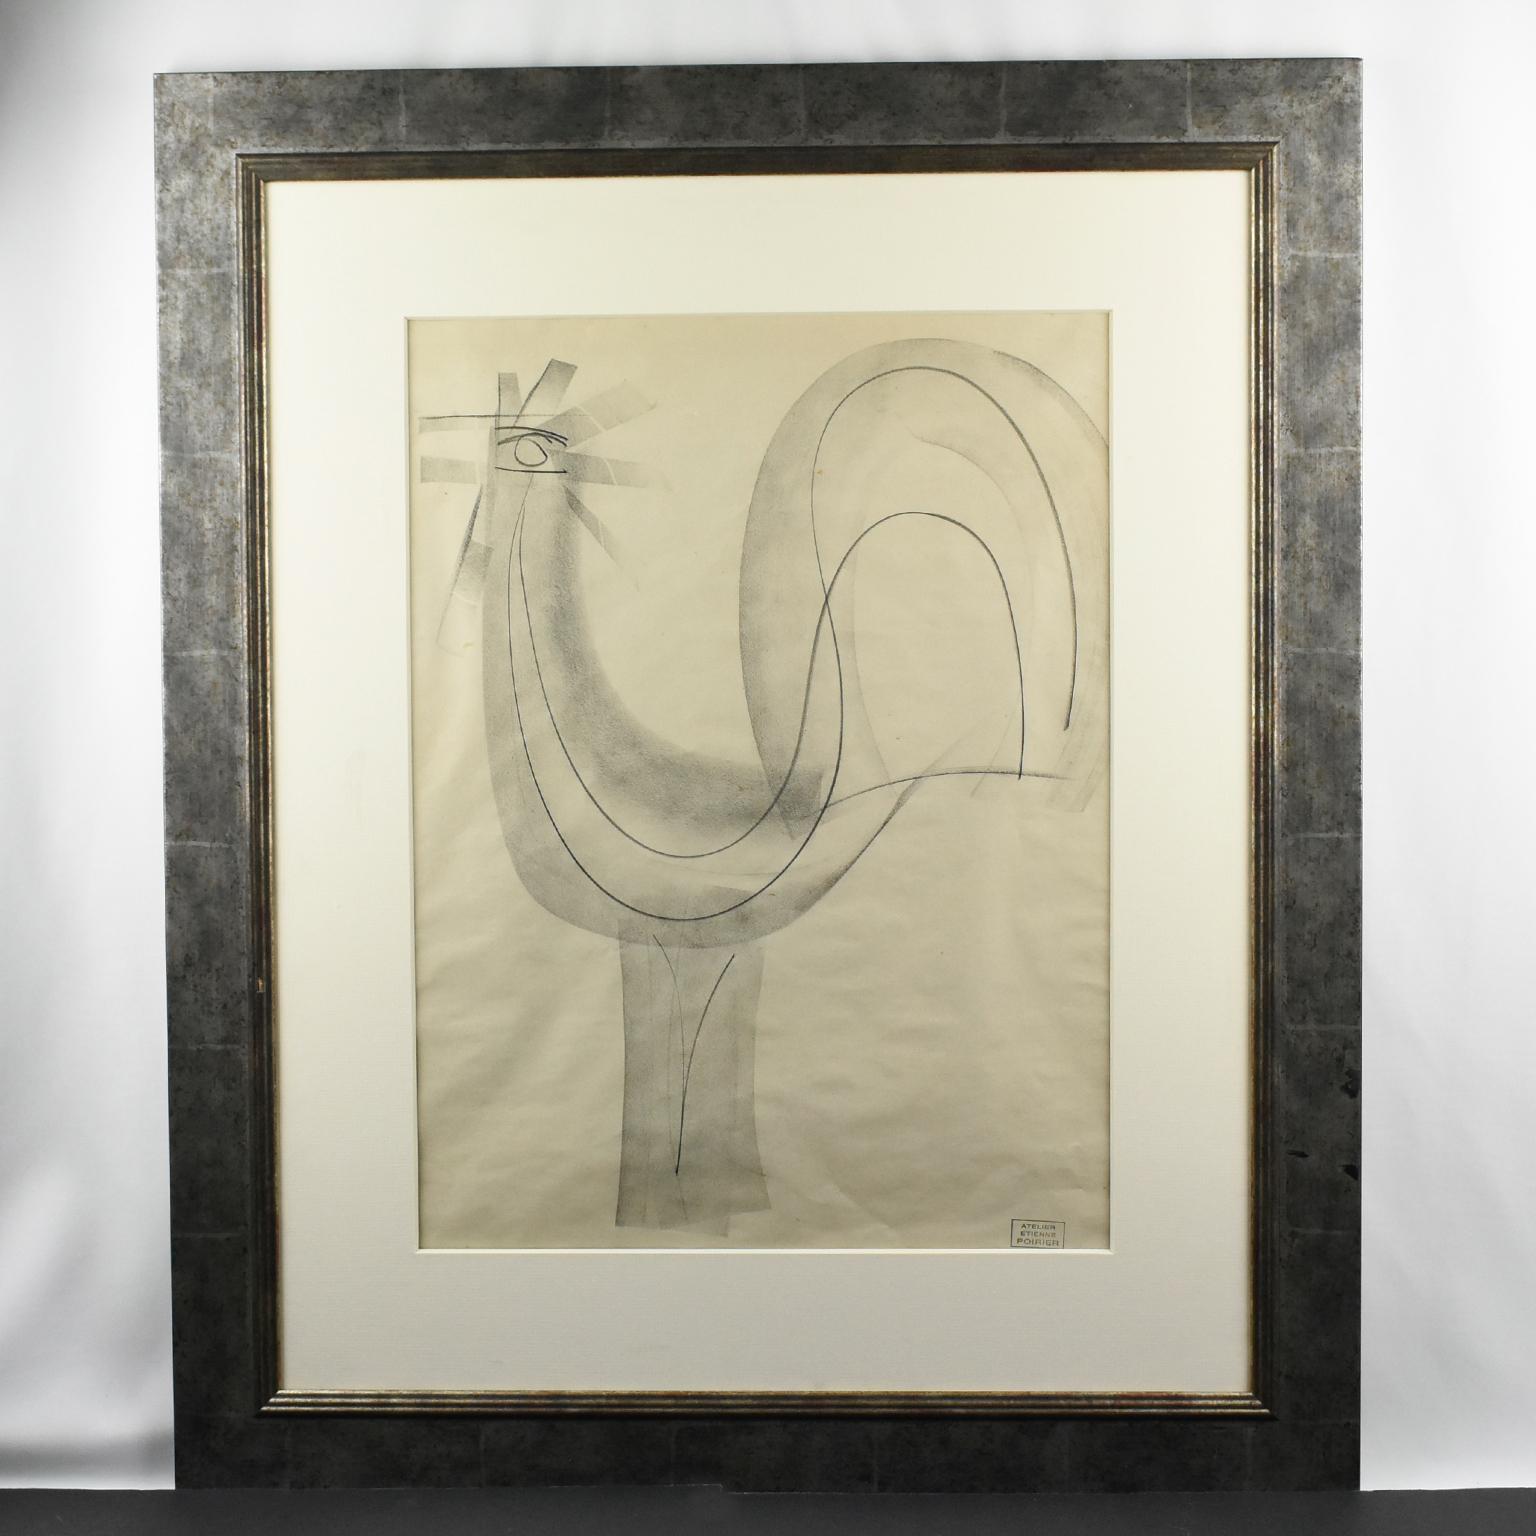 Stunning charcoal drawing by French artist Etienne Poirier (1909-2002). This work is a charcoal on paper depicting a proud rooster. Minimalist interpretation, only a few lines create the design which gives lots of intensity and presence to the